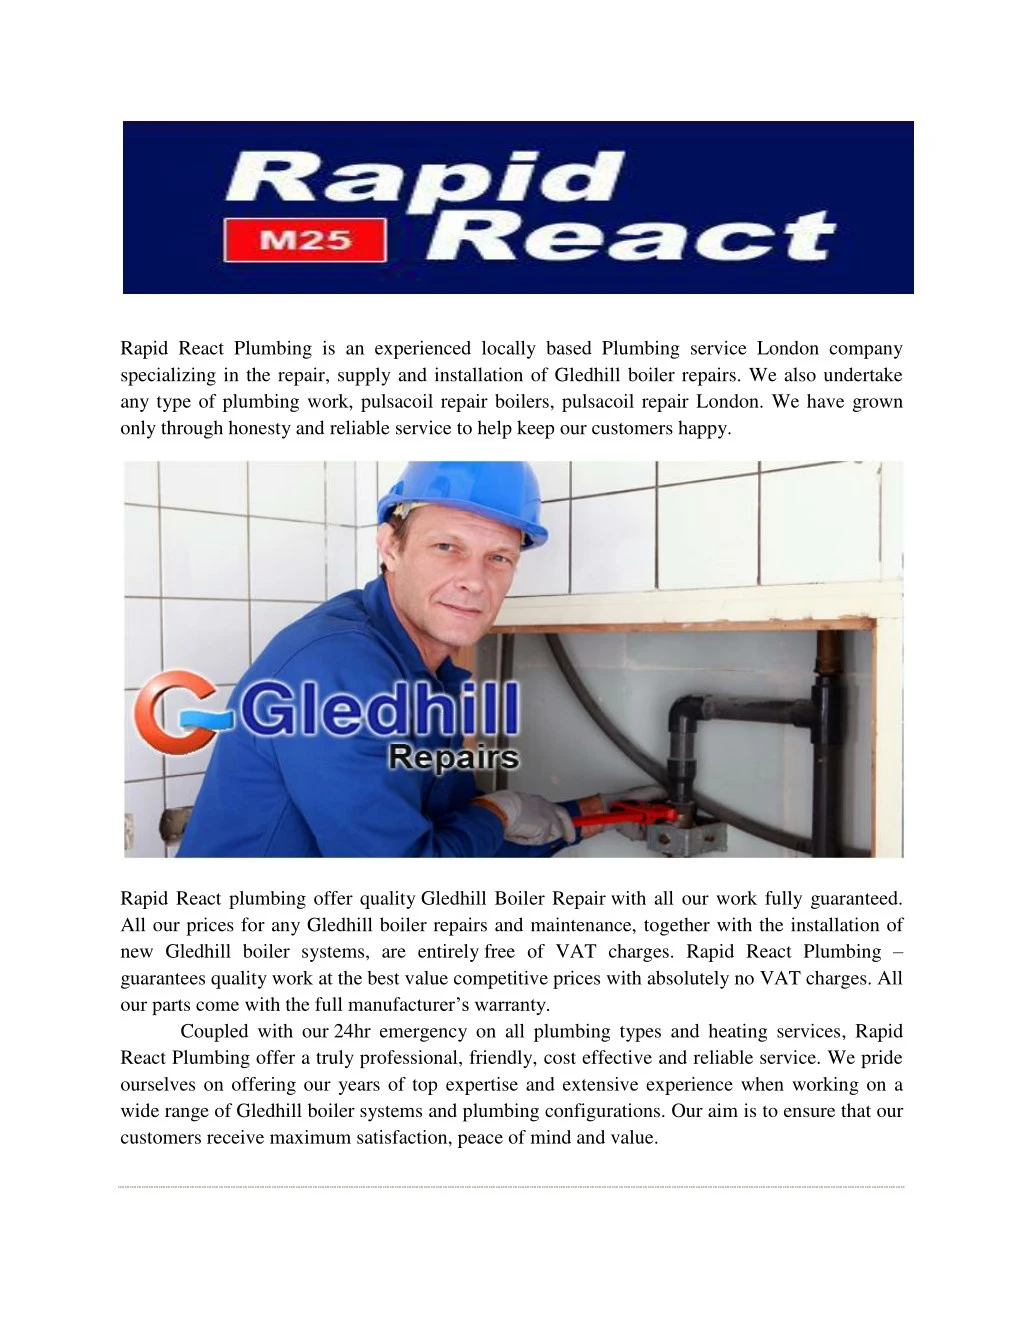 rapid react plumbing is an experienced locally